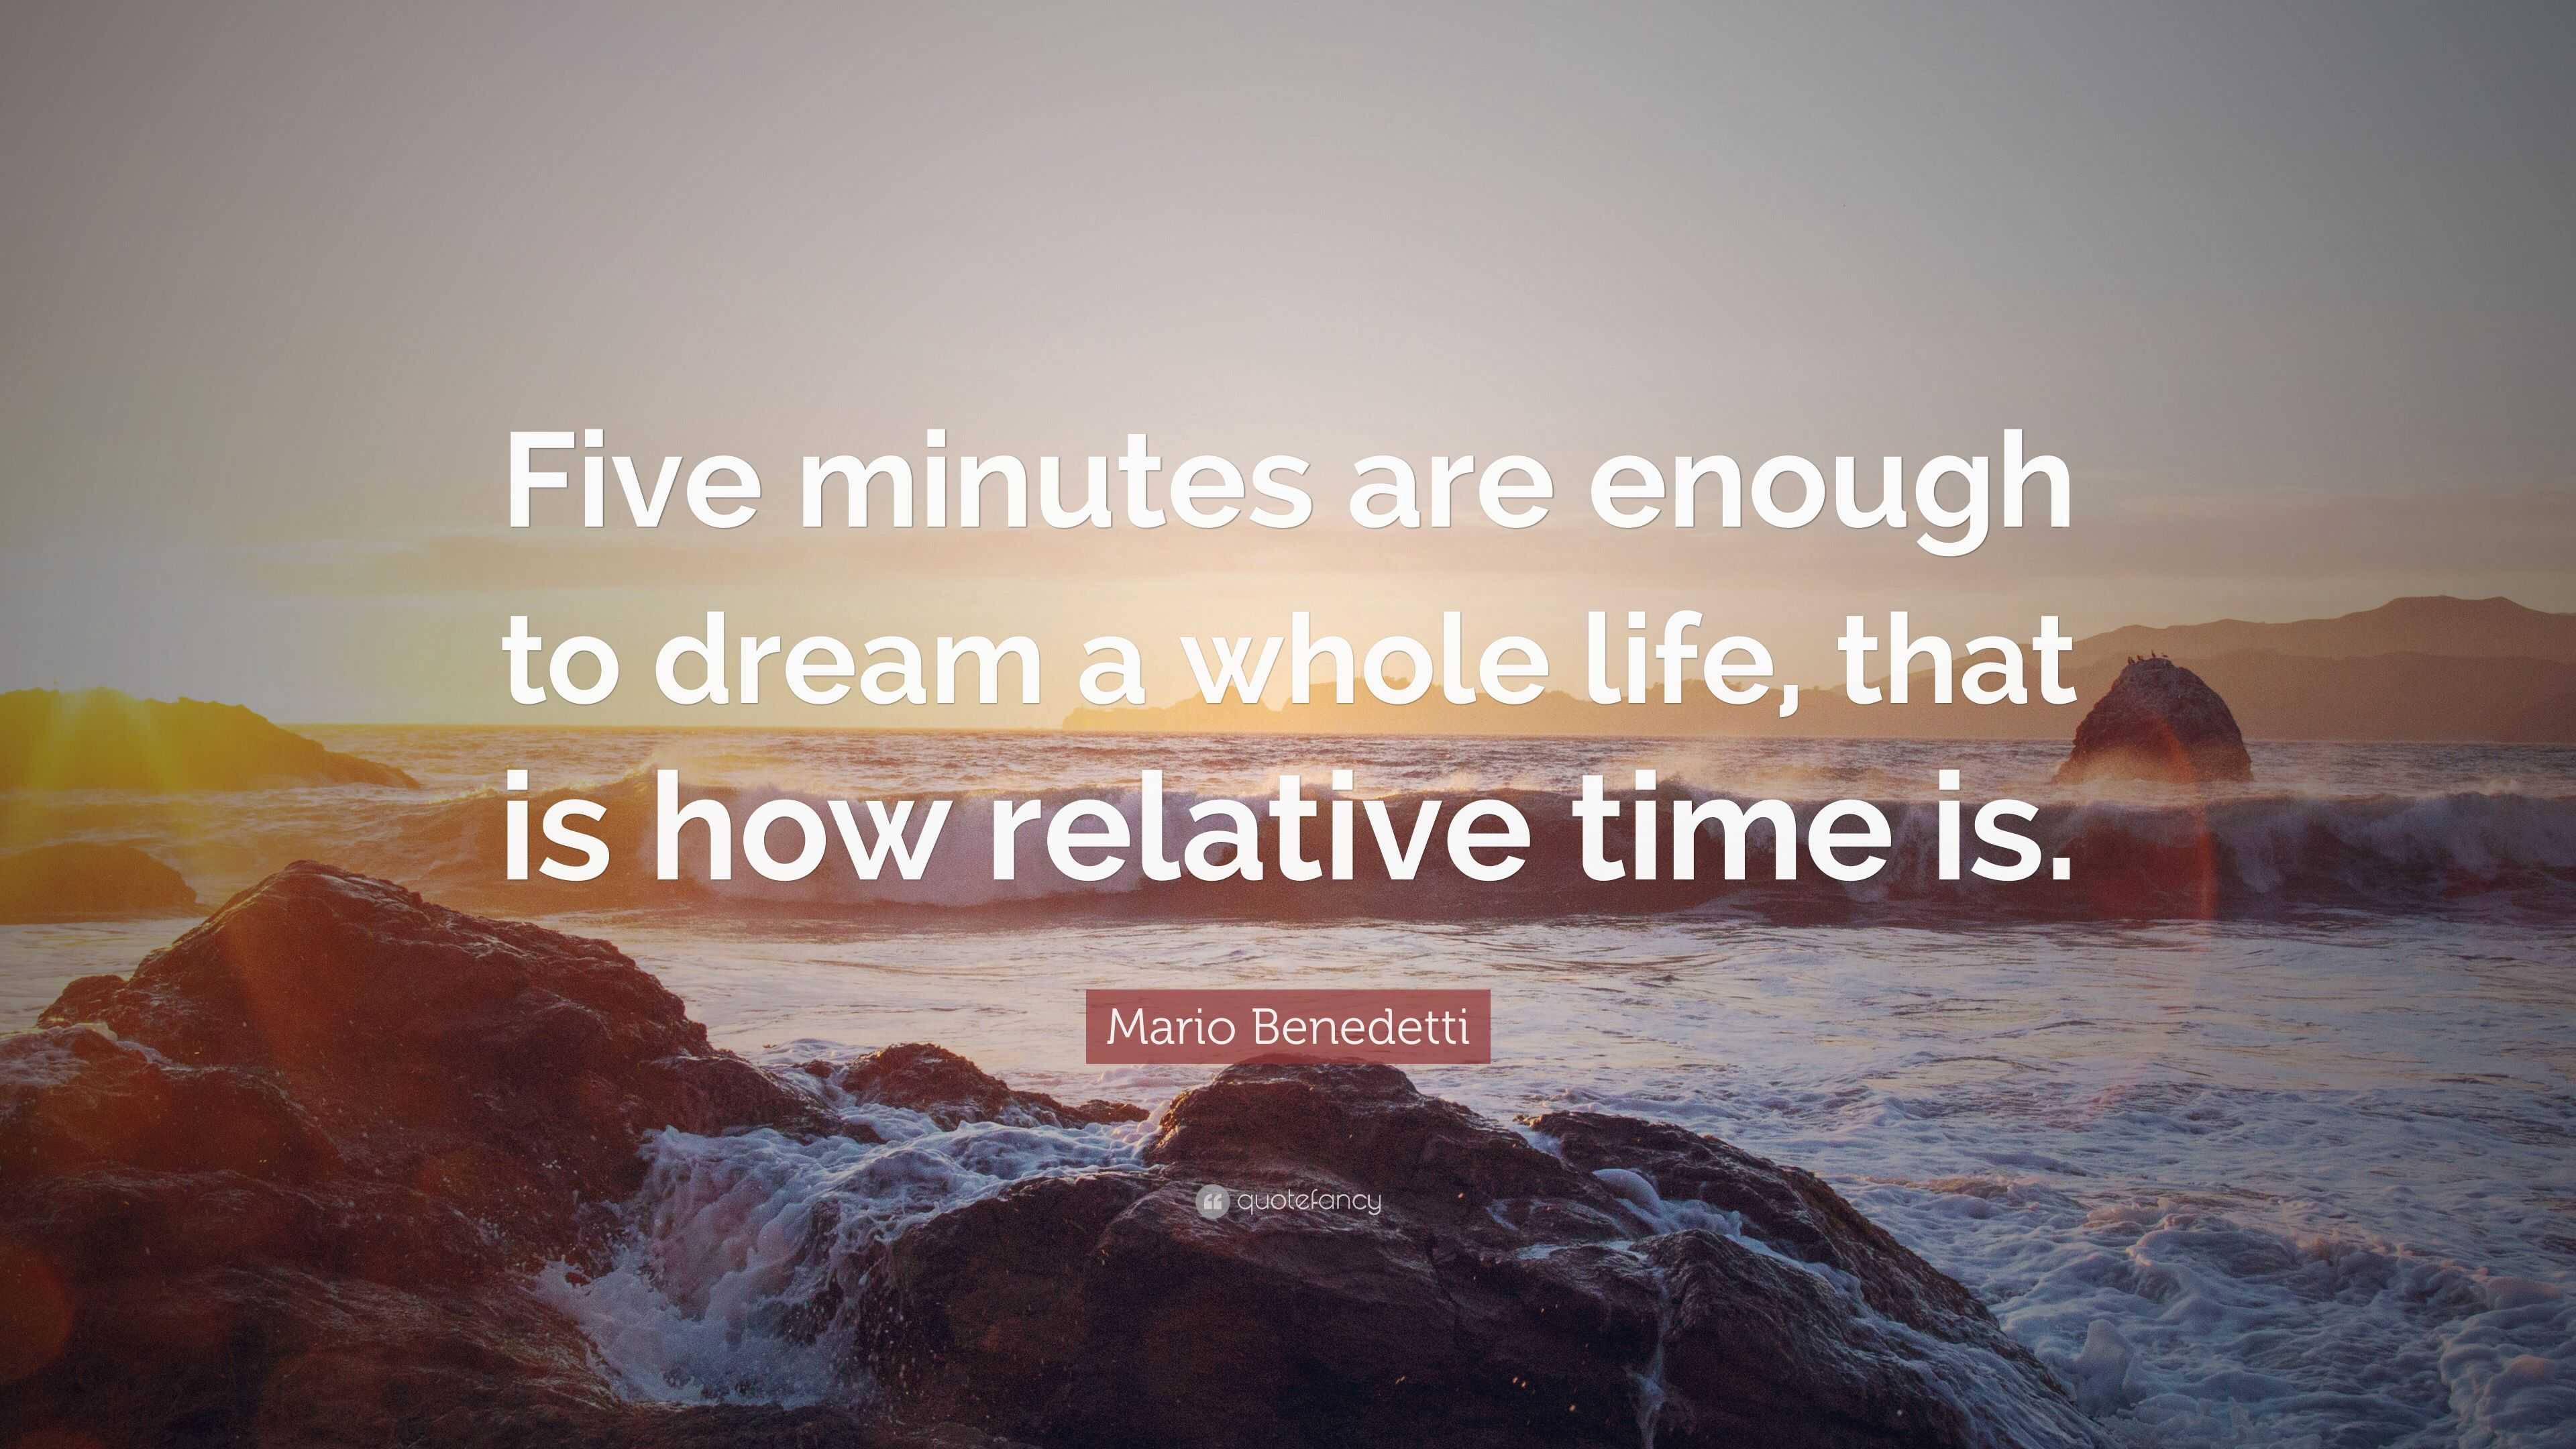 Live an entire life in five minutes in Life is a Game